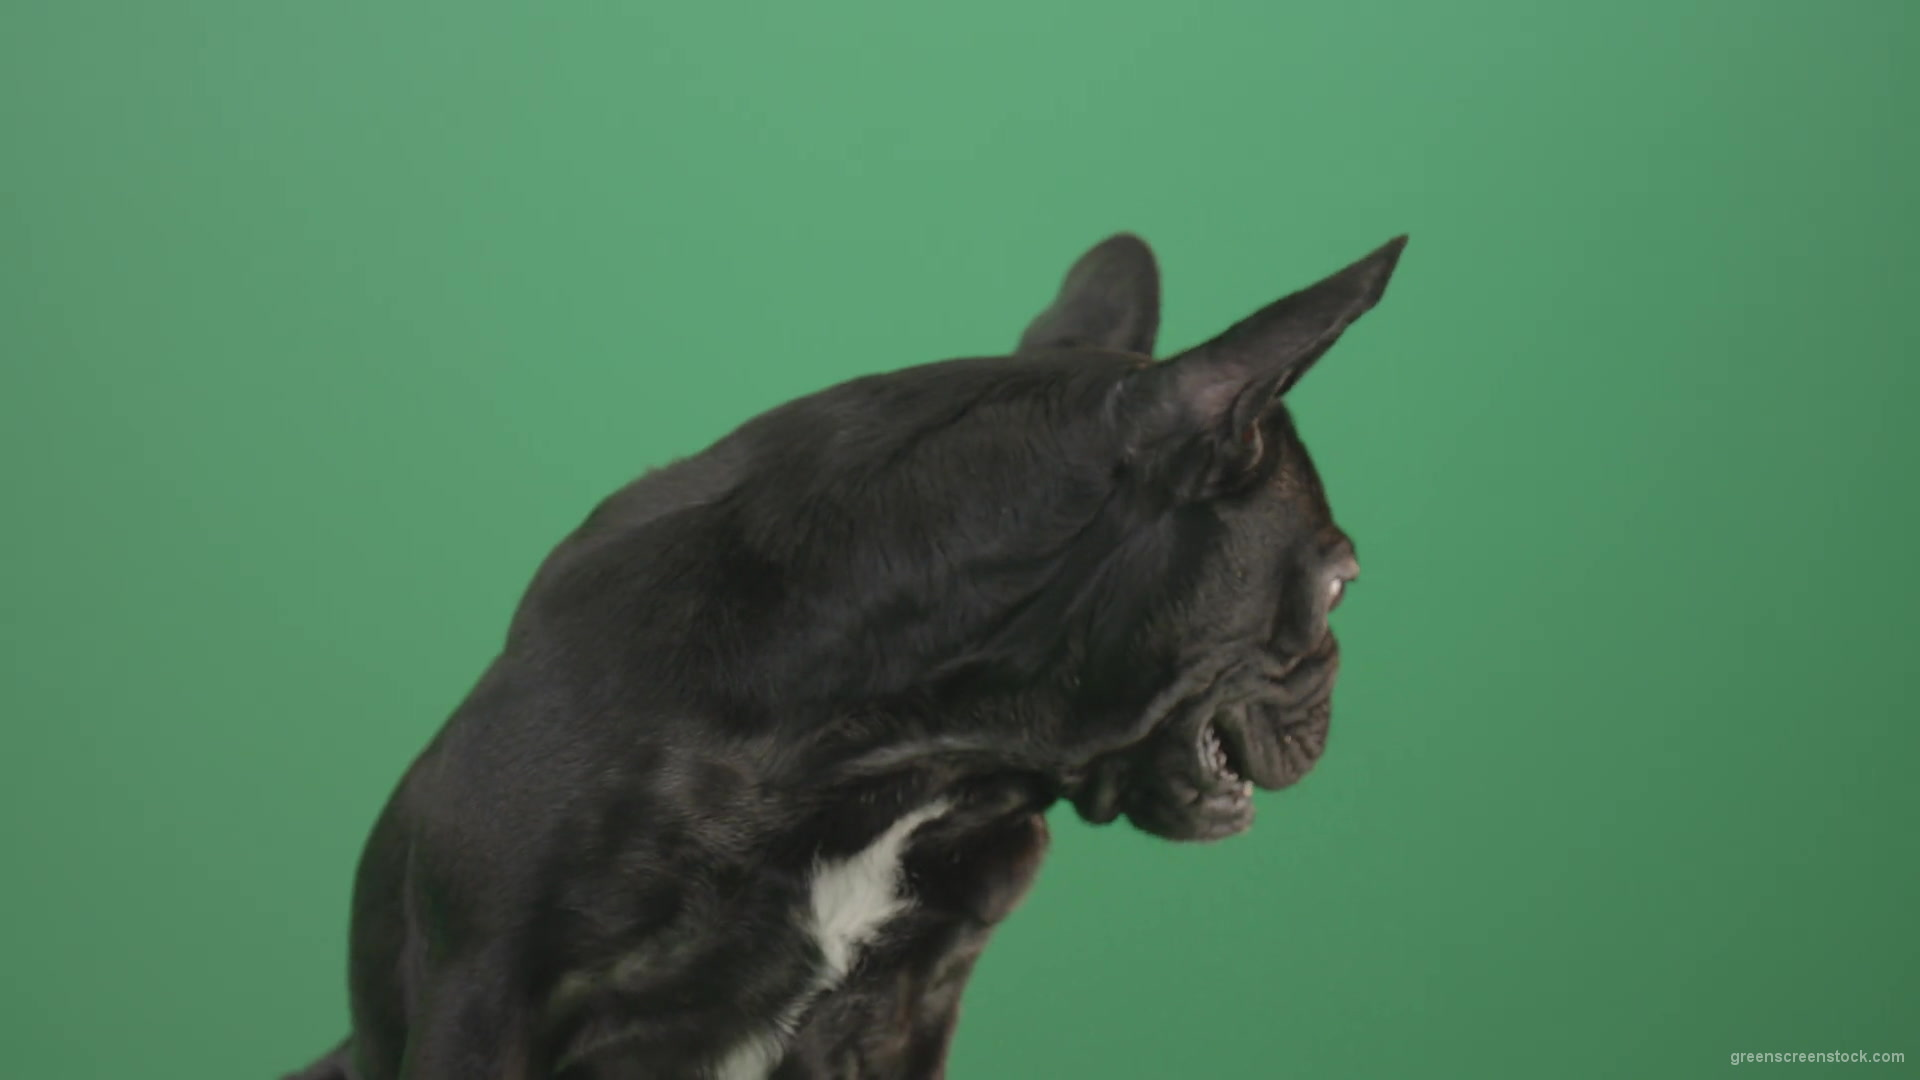 Face-portrait-of-scared-french-bulldog-toy-dog-isolated-on-green-screen-1920_002 Green Screen Stock